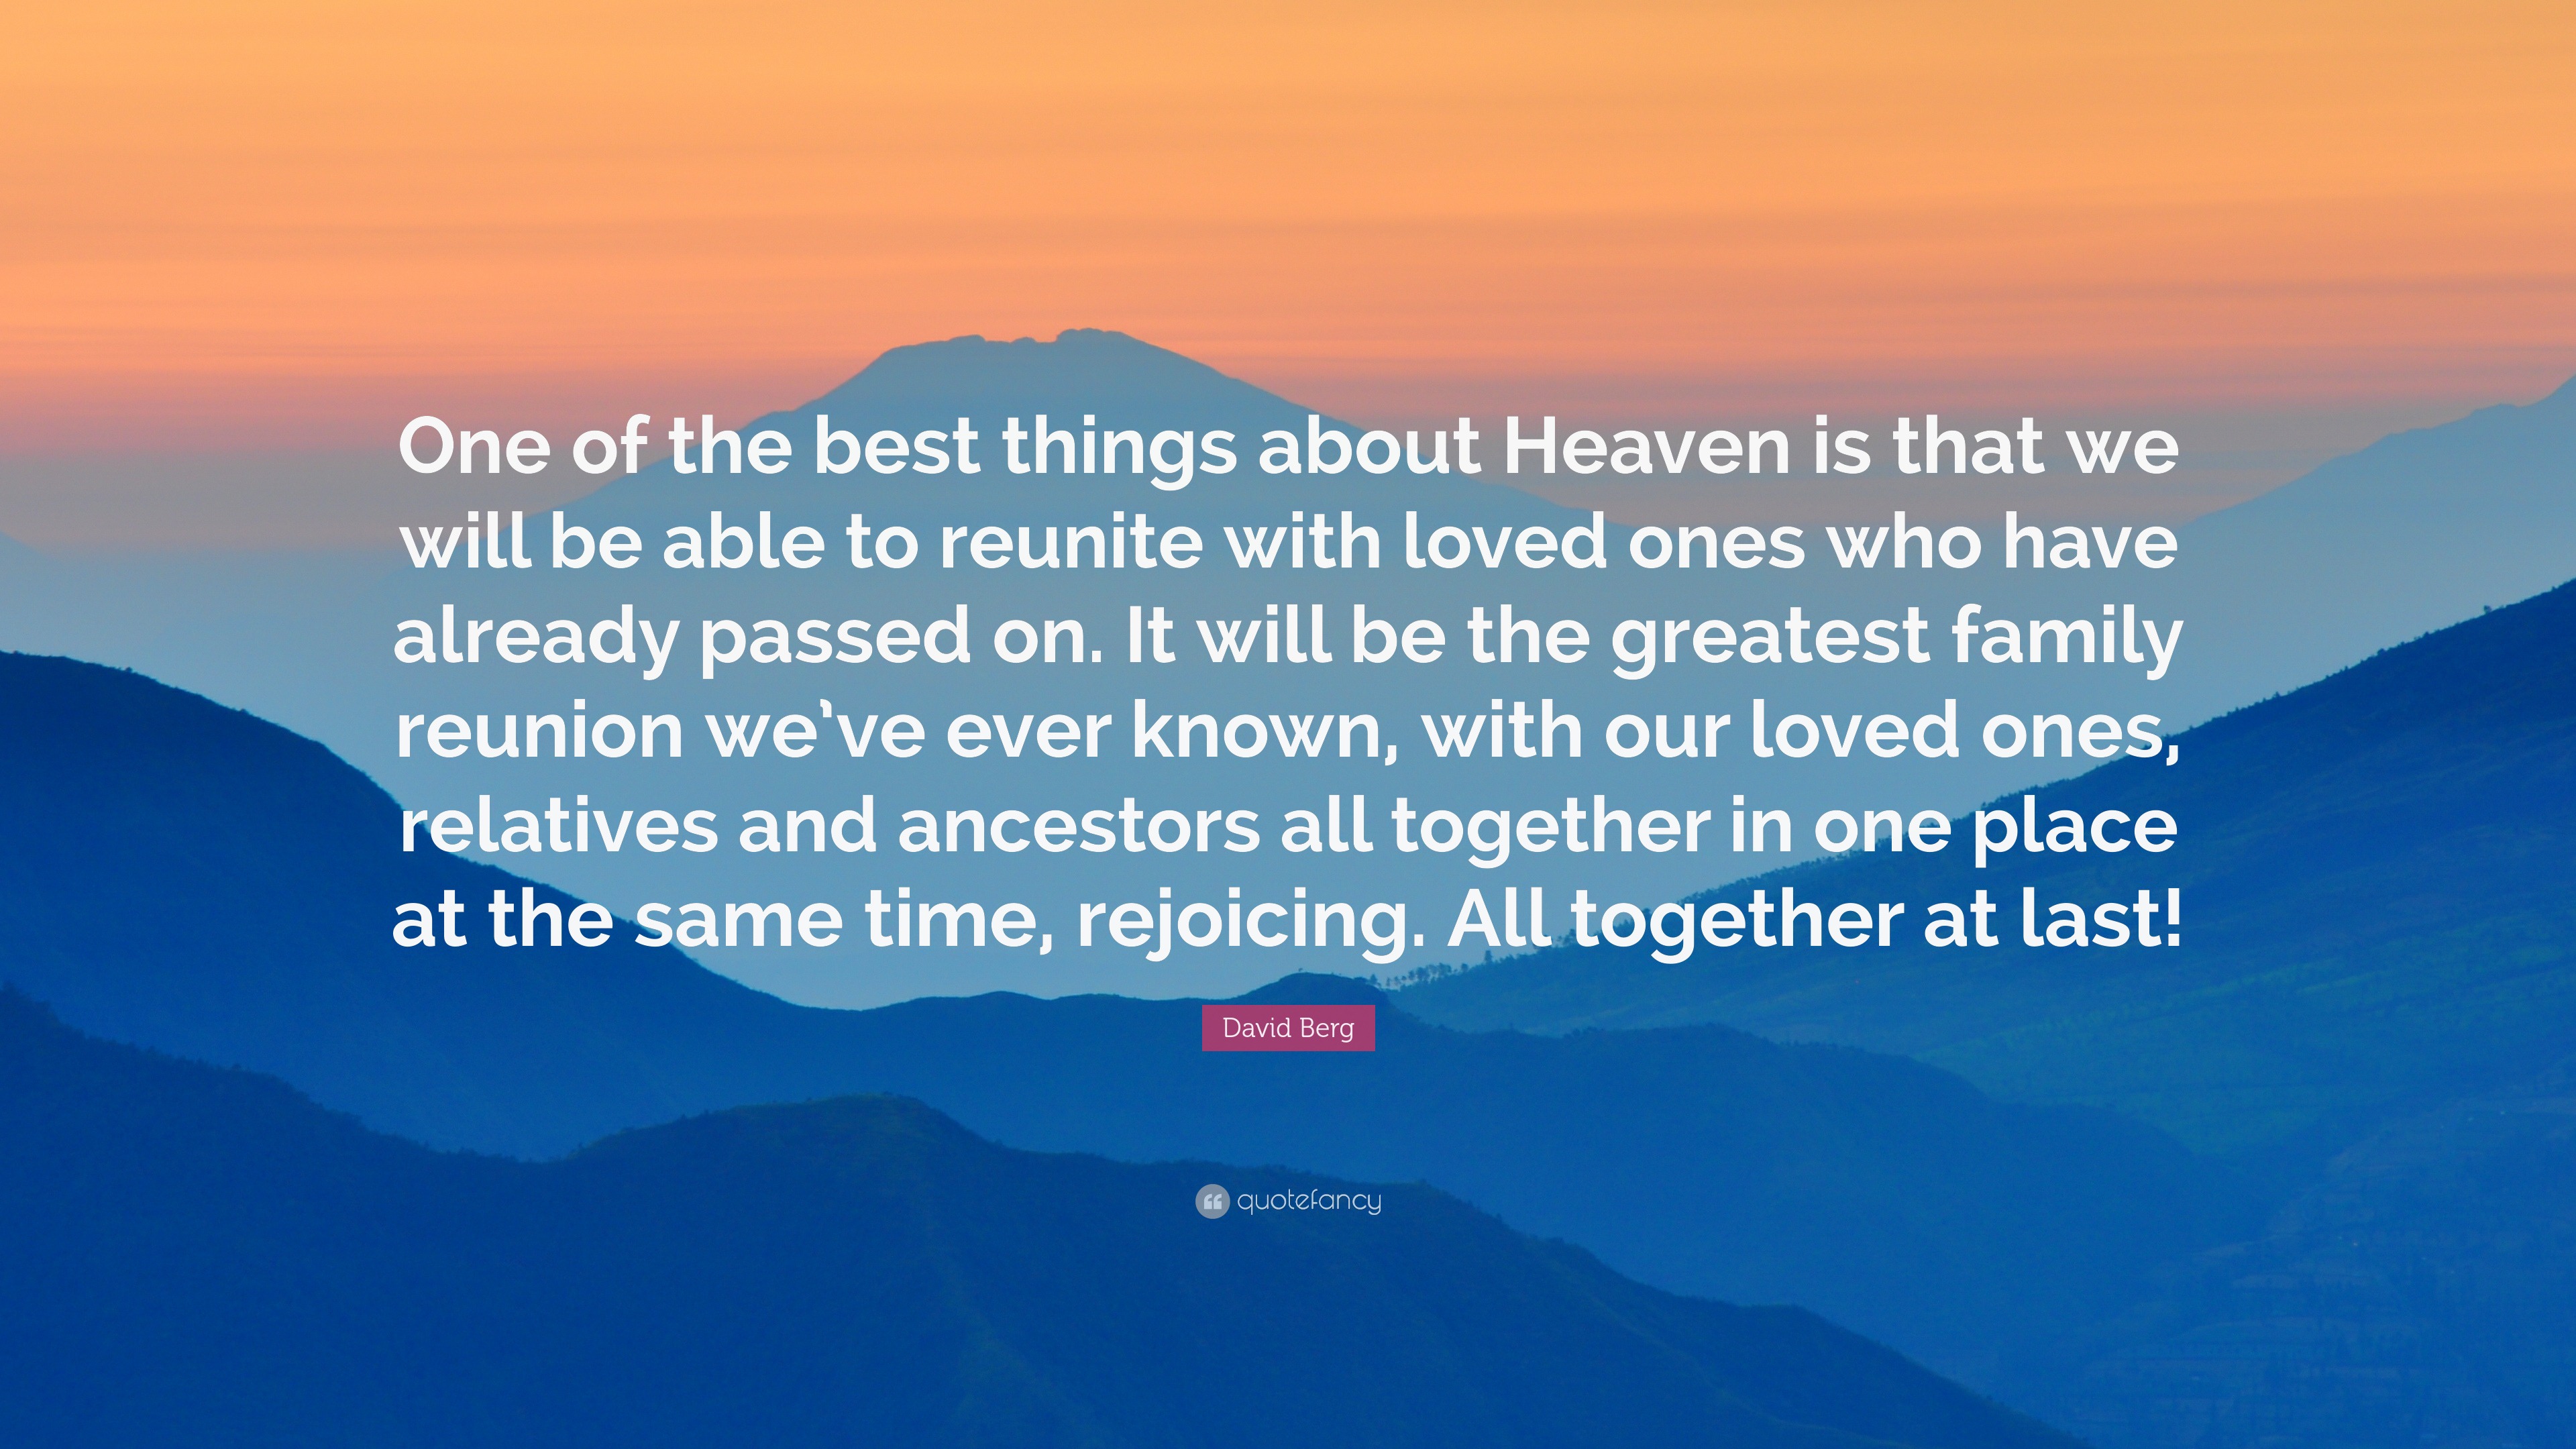 David Berg Quote “ e of the best things about Heaven is that we will